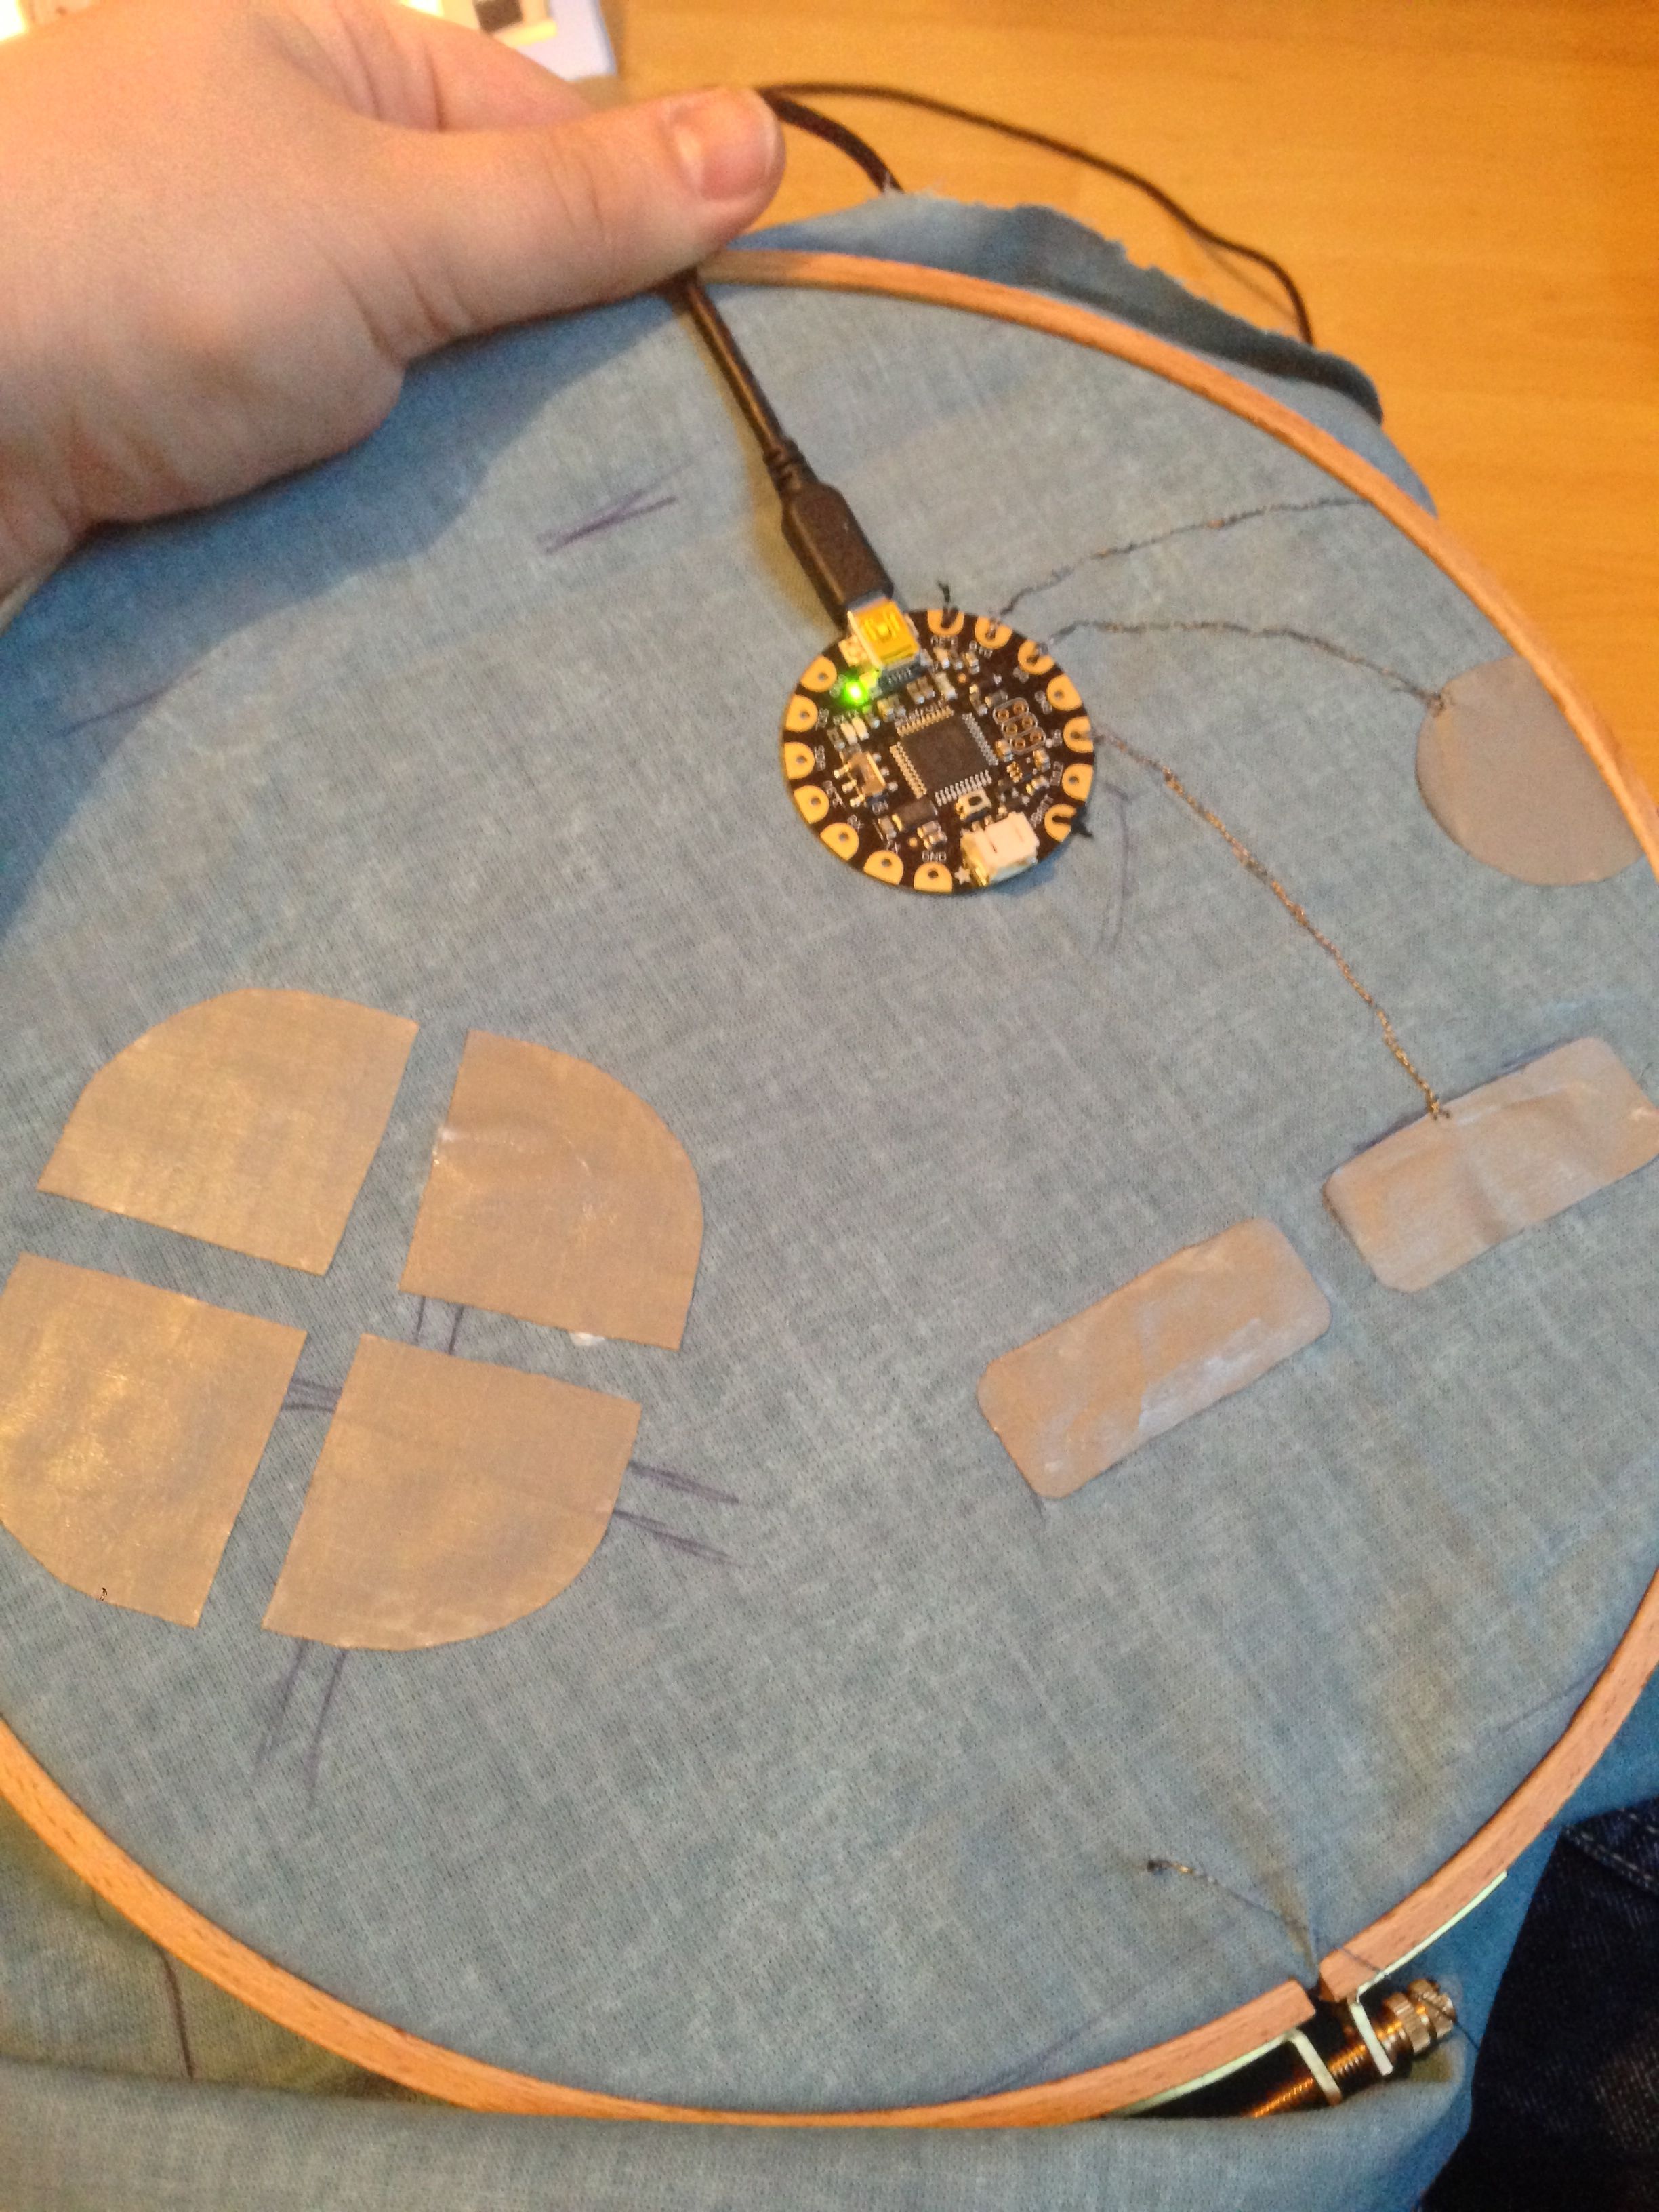 Sewing conductive threads to the flora controller and conductive fabirc pads